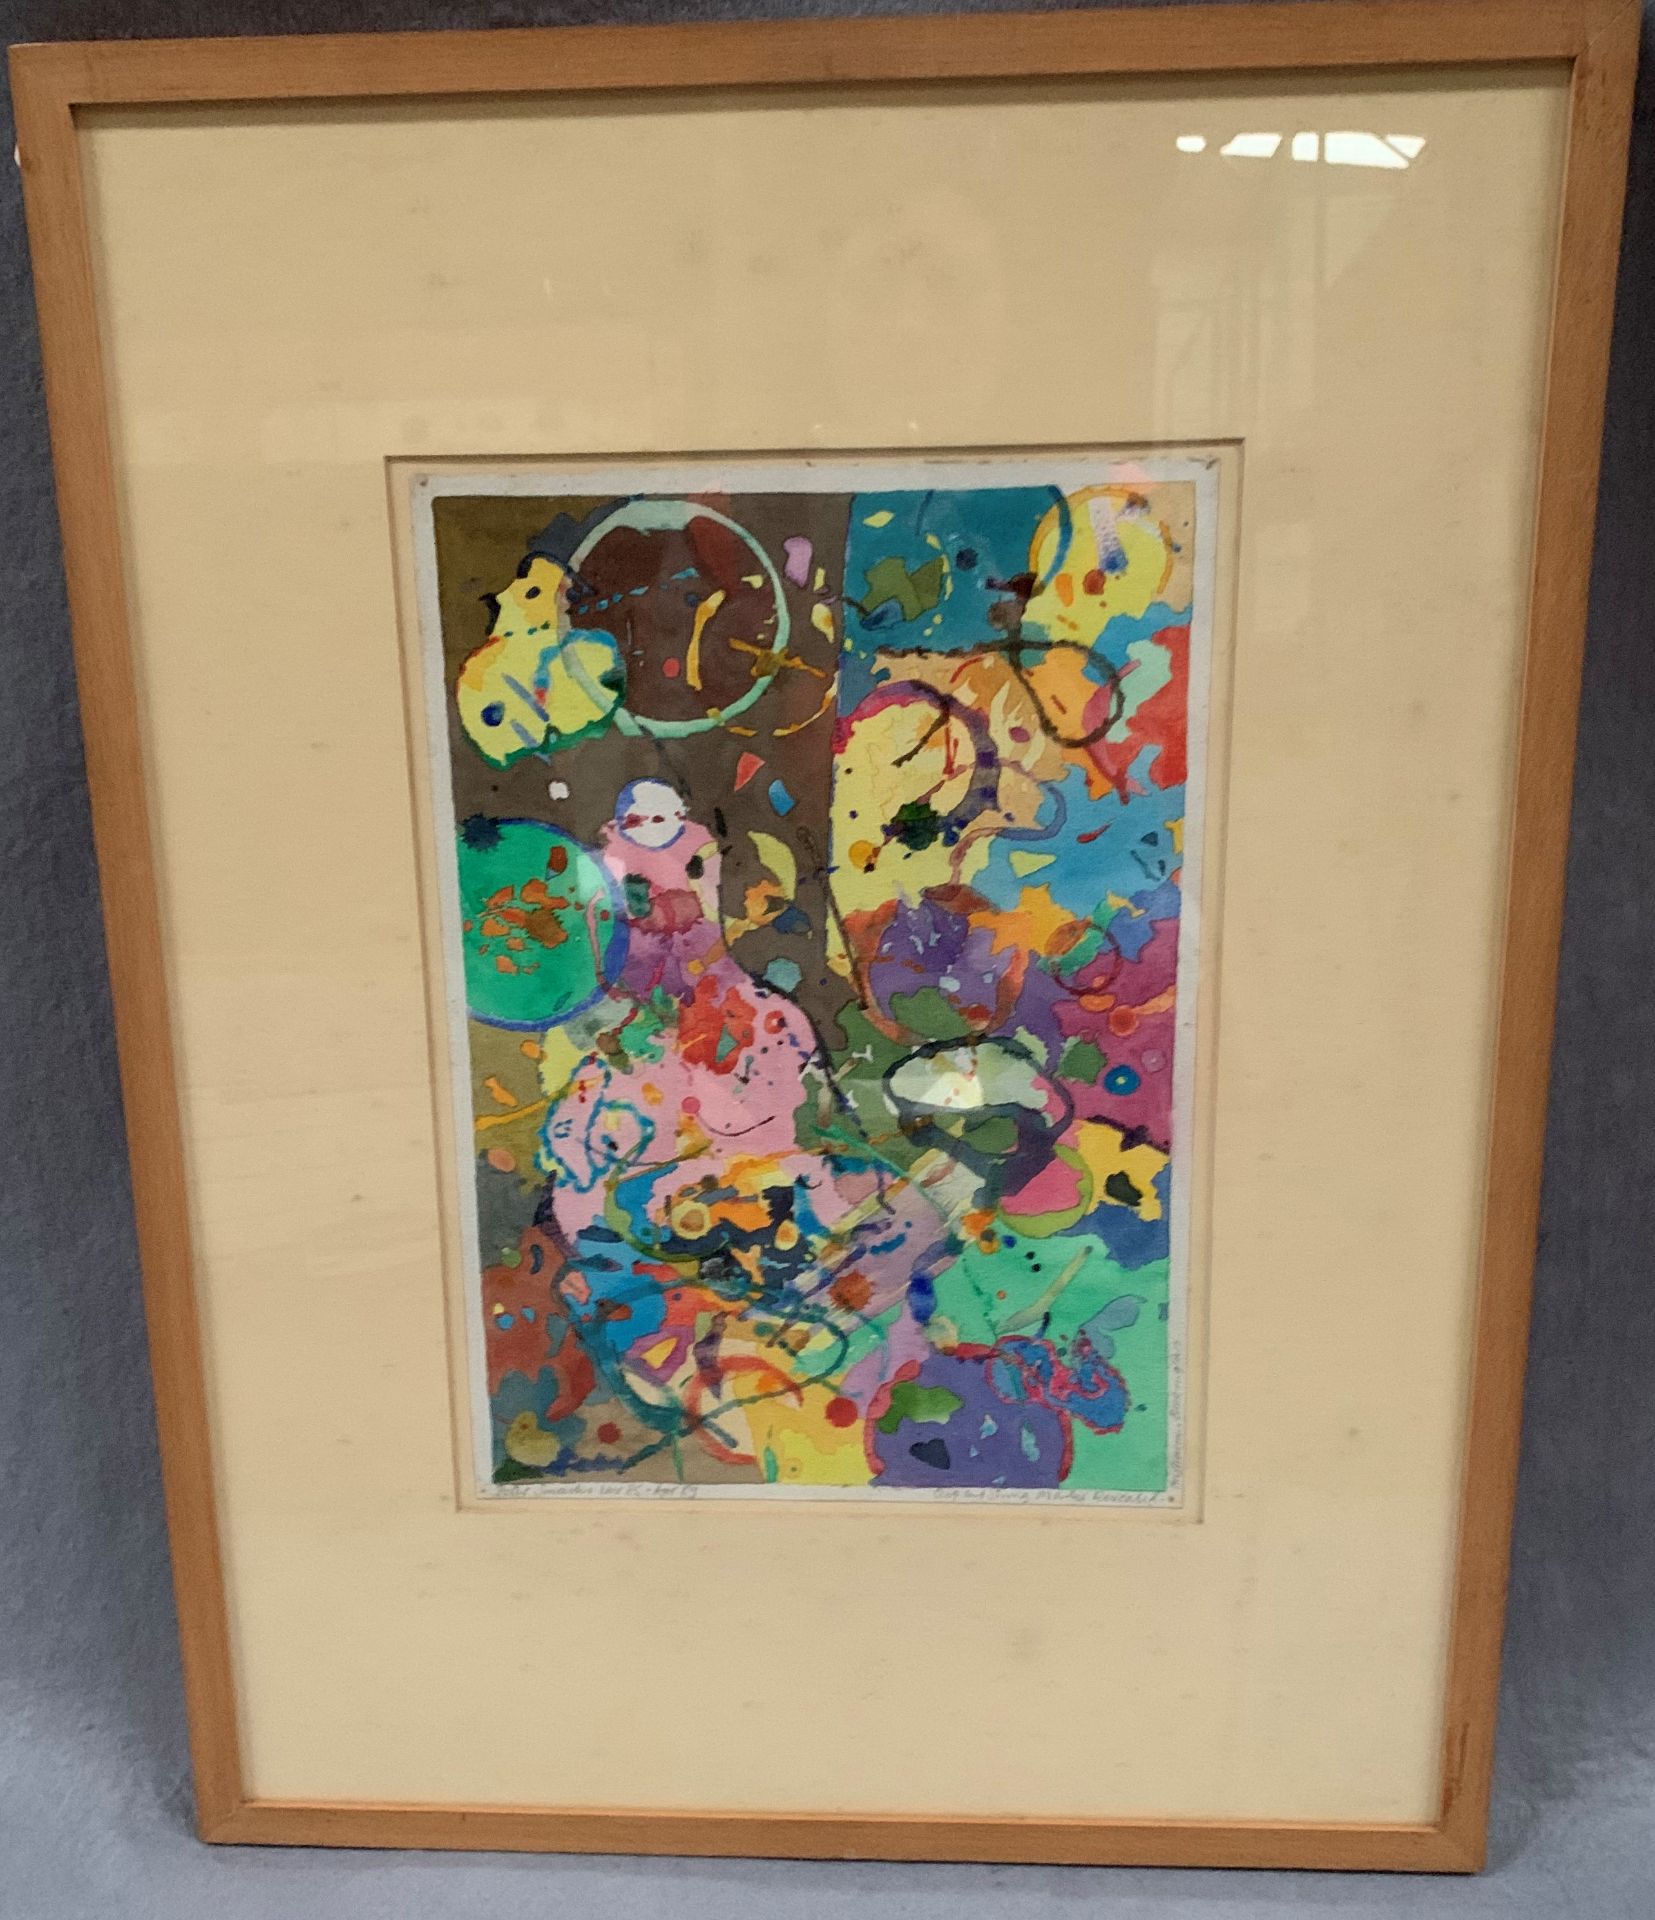 Peter Smailes framed watercolour cup and string Marks revealed signed in pencil with date 'Nov